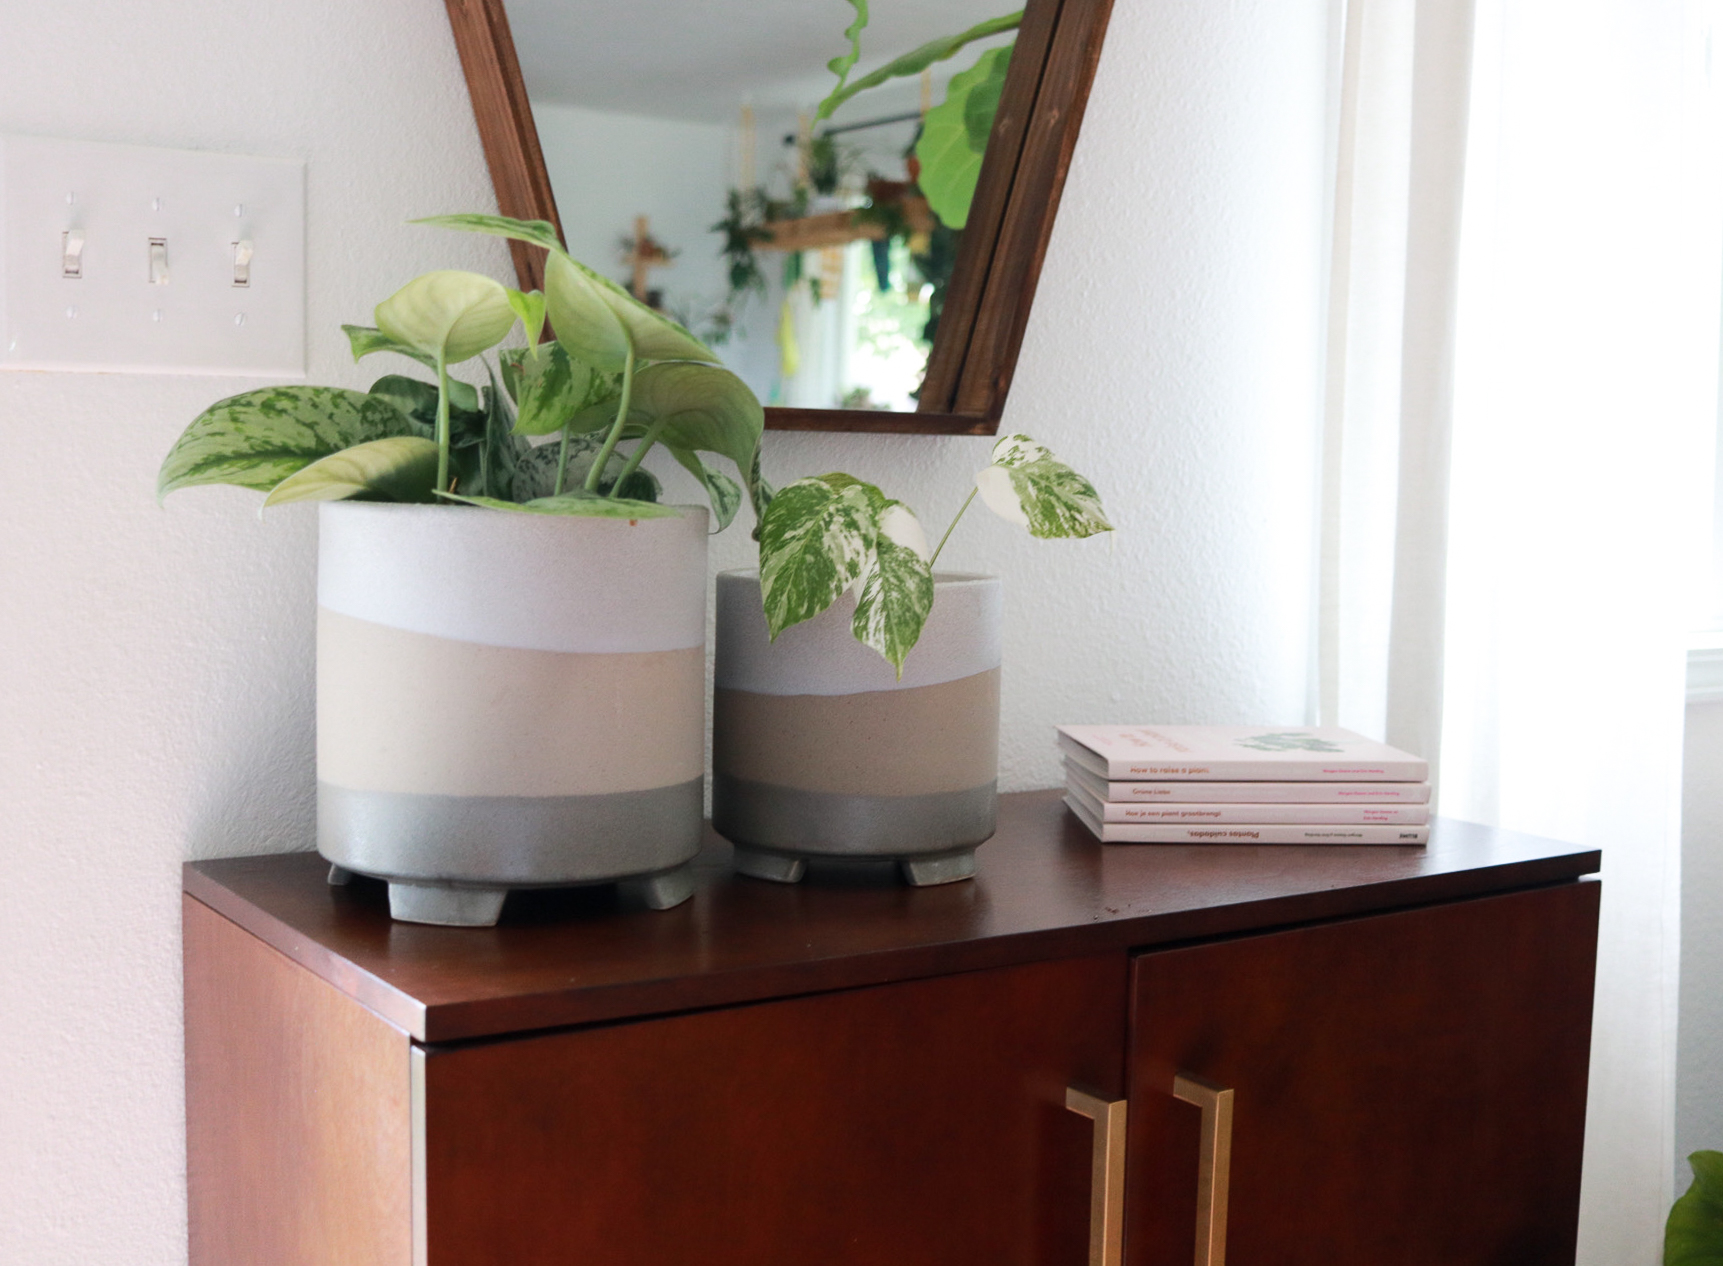 The best Pots & Planters to Refresh Your Home. Looking for affordable ways to add life and freshen up your space? A new pot/plant combo can do wonders. Check out my current favorite pots and planters. - Clever Bloom